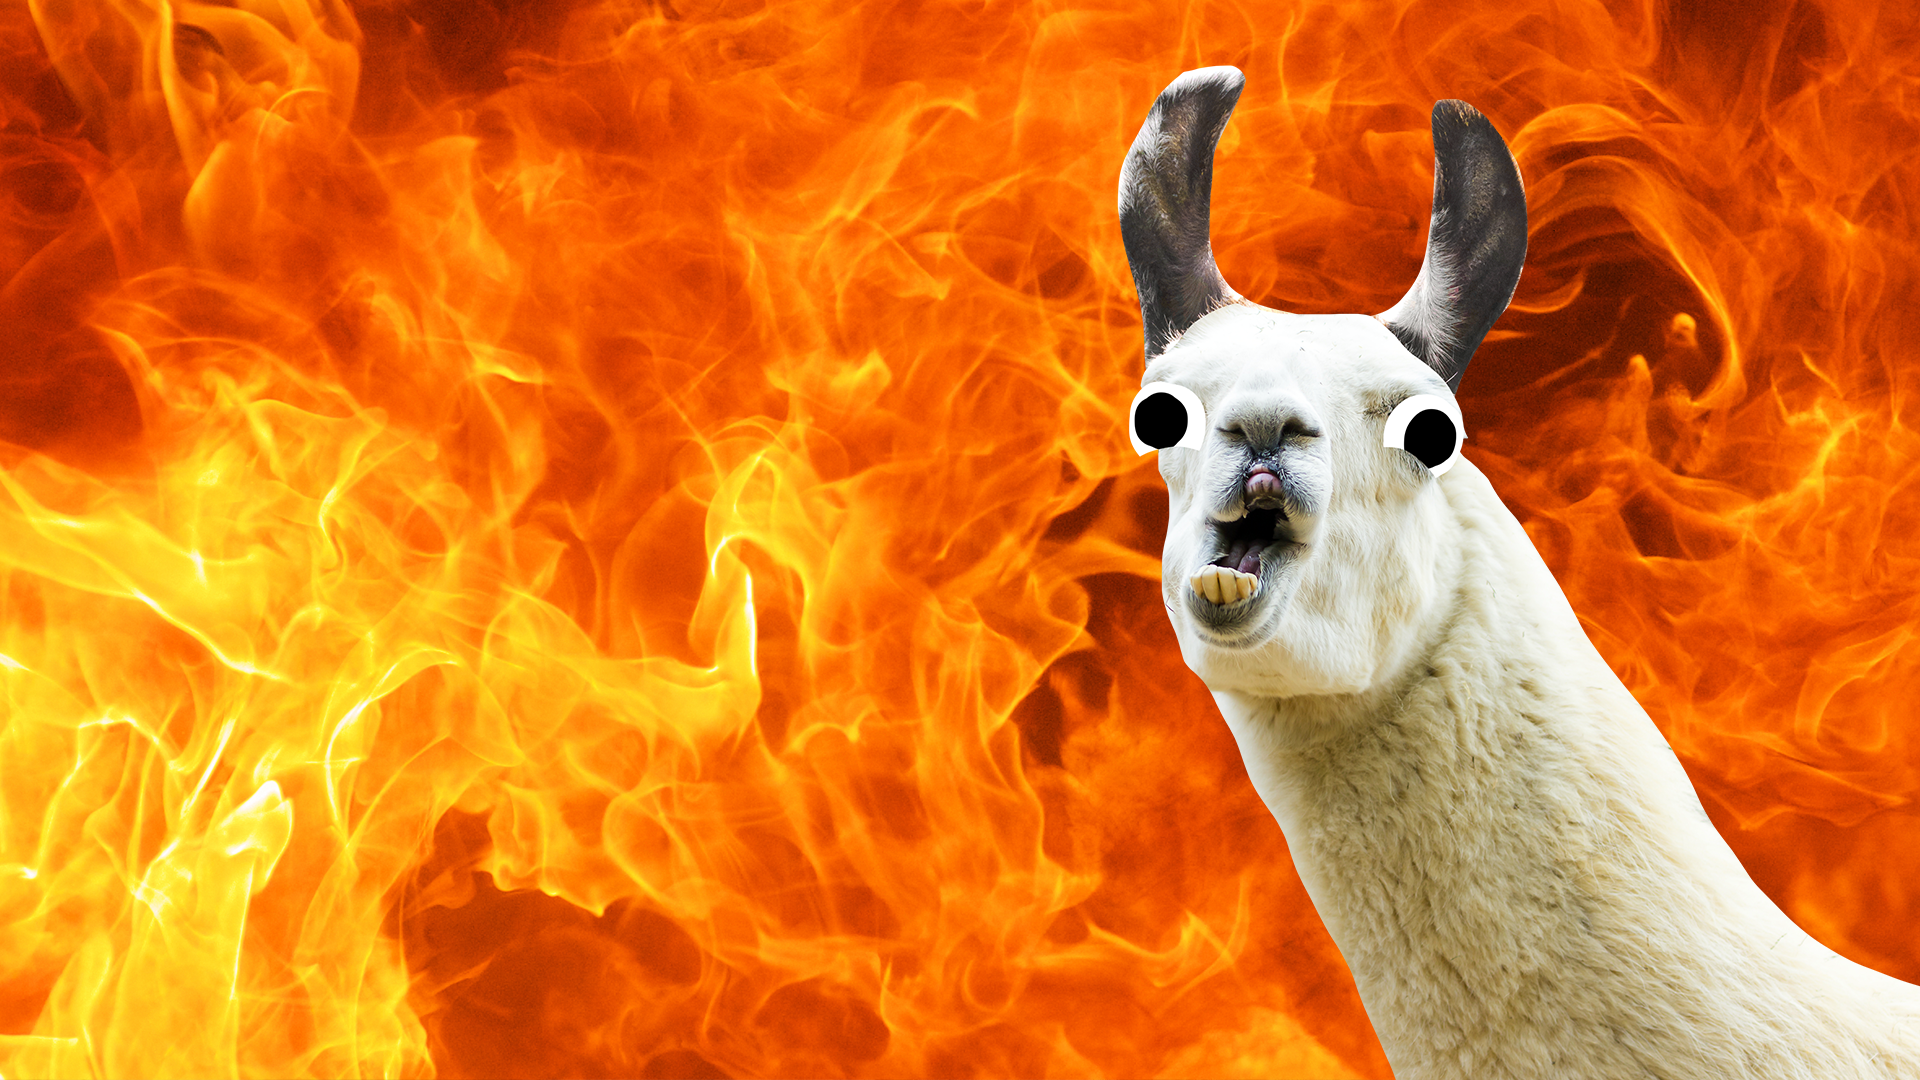 A funny llama and some flames 